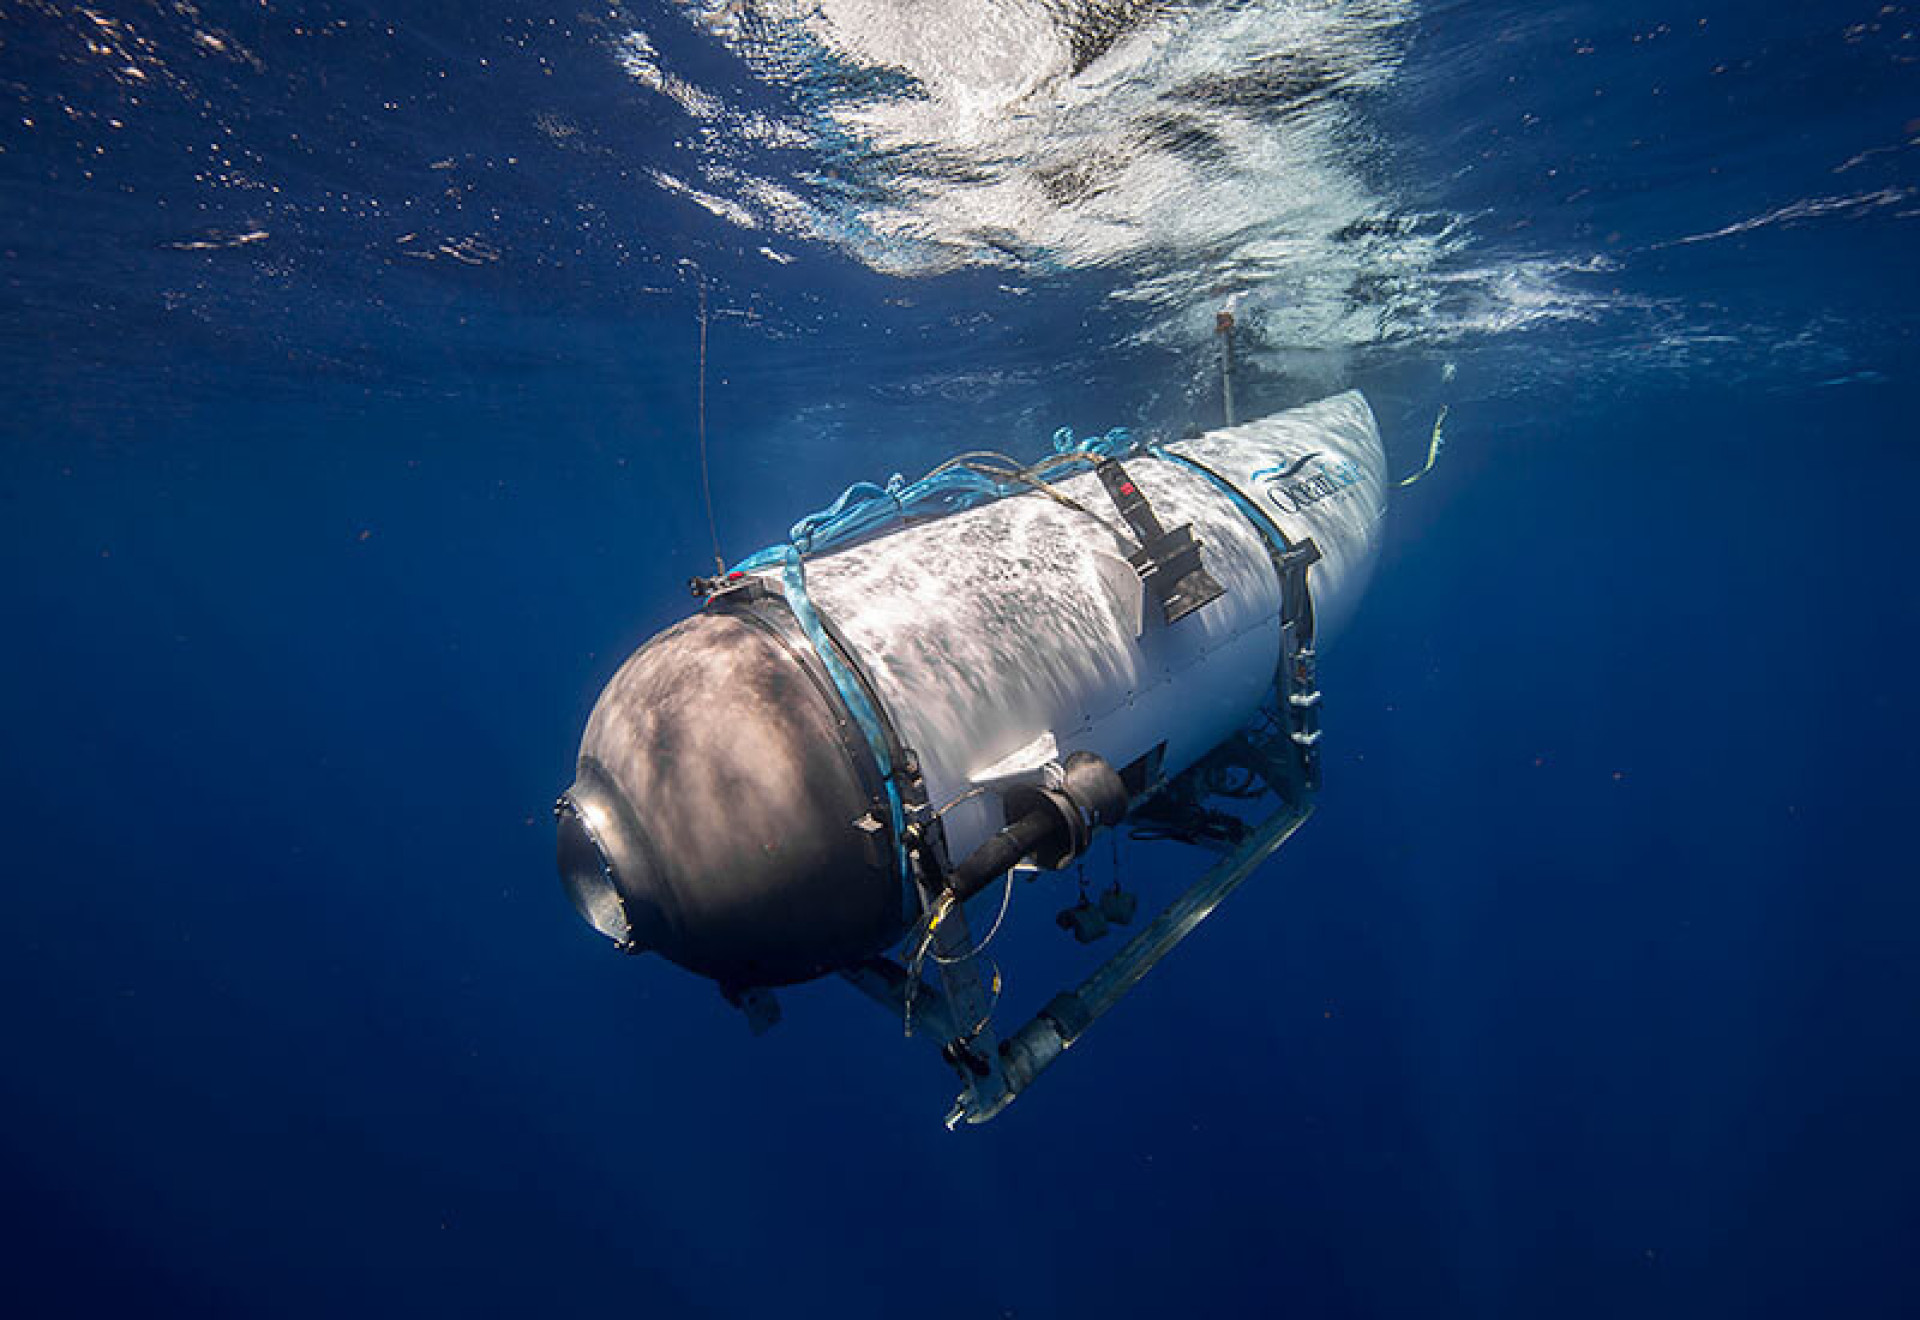 <p>The pictured sub belonged to OceanGate Expeditions, a private company that provides crewed submersible services for exploration, industry, and research purposes. But on June 18, 2023, one of their <span><span>submersibles went missing after two hours of getting into the North Atlantic to explore the Titanic wreck—a trip that cost US$250,000 a head. Tragically, the five individuals aboard were all declared dead on</span></span><span><span> June 22.</span></span></p>